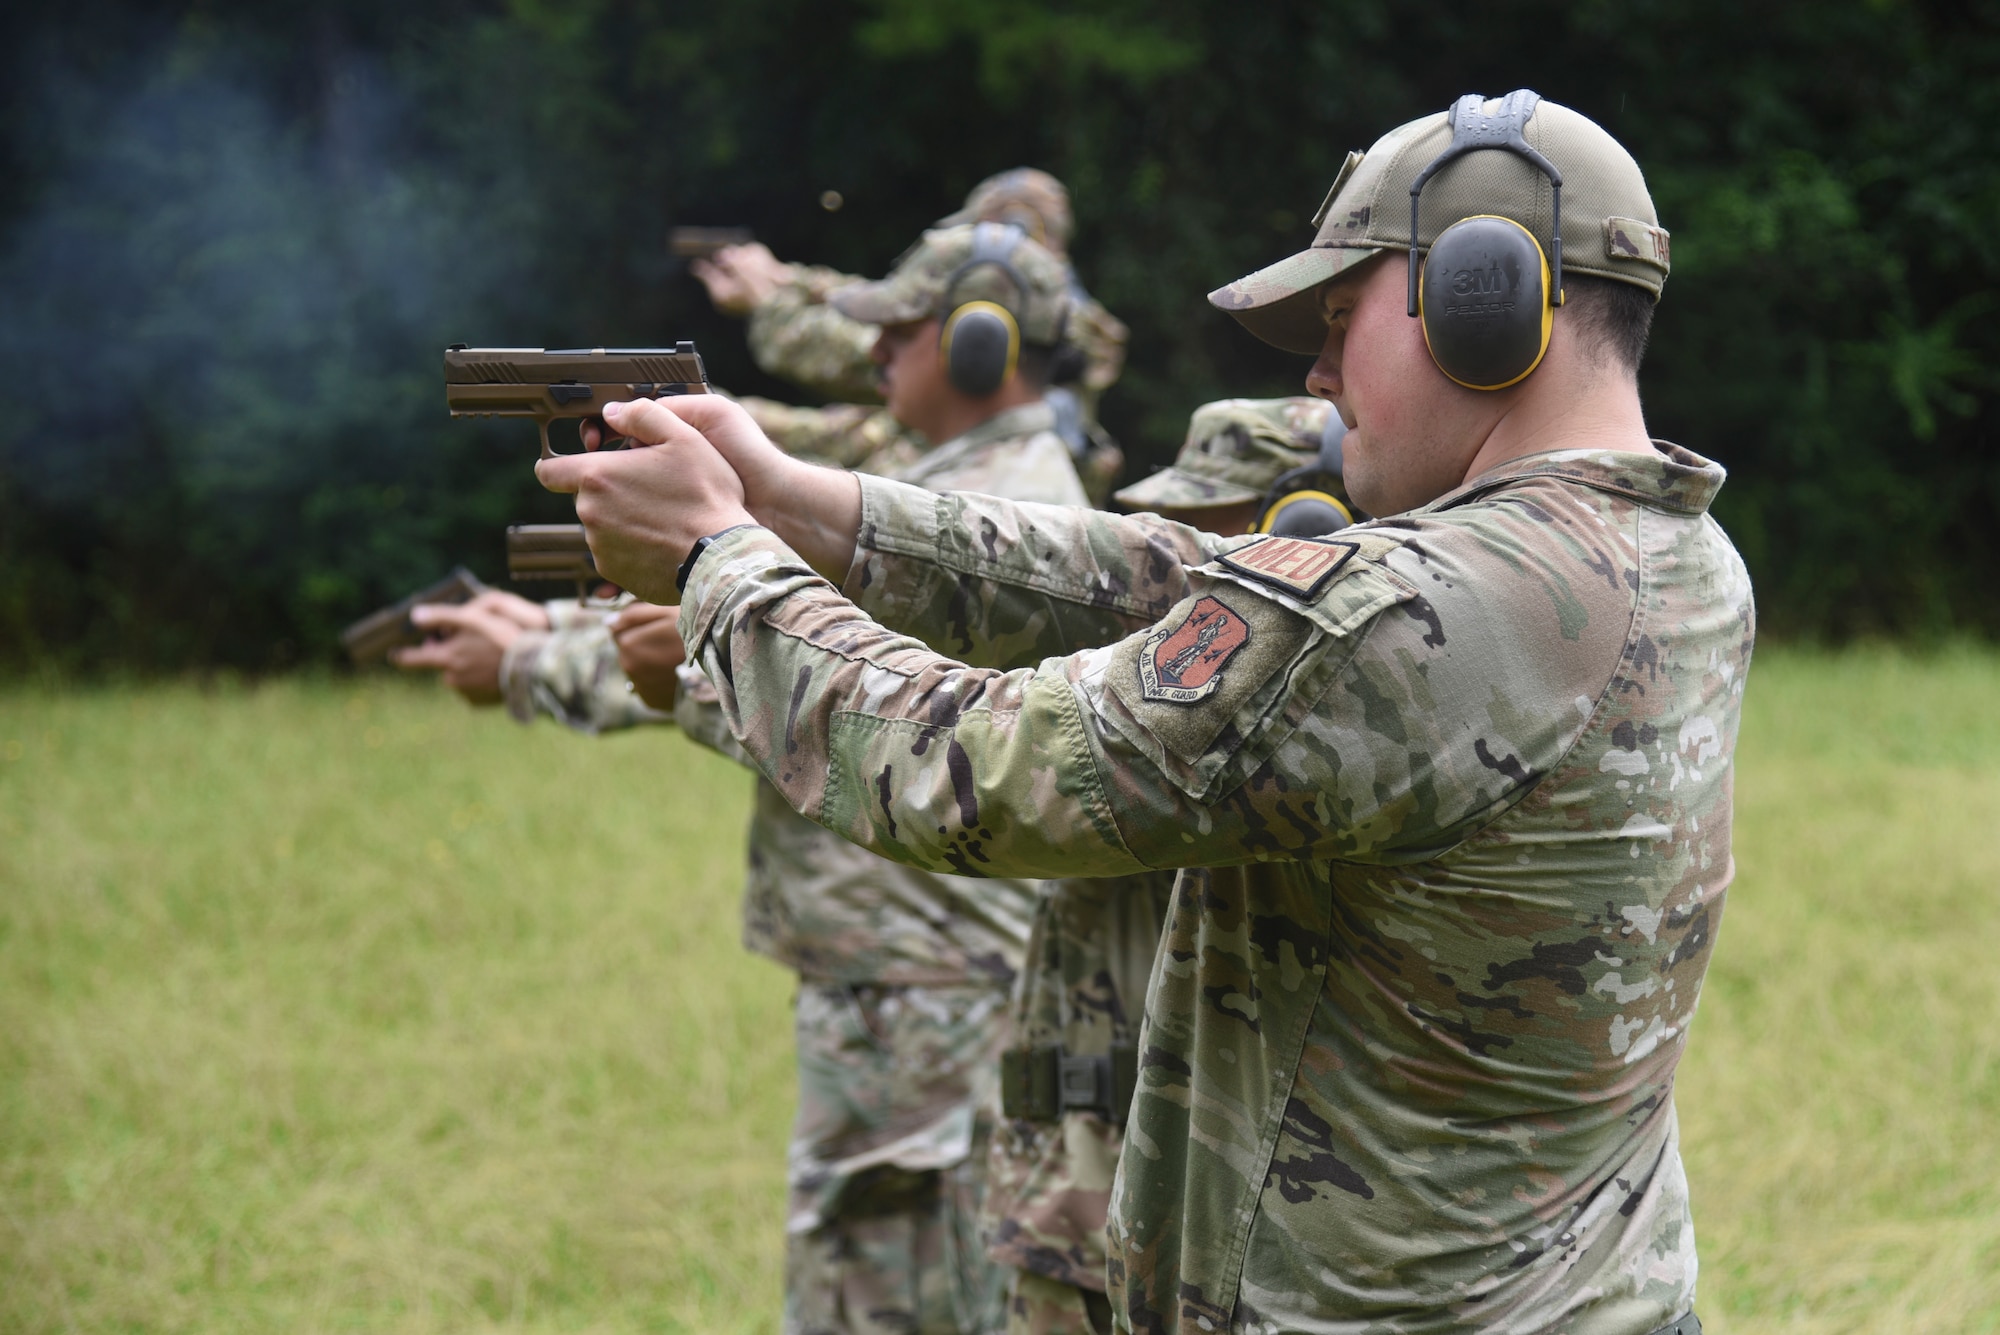 Members of the 117th Air Refueling Wing qualify on the M-18 handgun at the Magic City Gun Club in Birmingham, Alabama, August 4, 2023. The qualification consisted of two rounds of shooting from various distances. (U.S. Air National Guard photo by Staff Sgt Nicholas Faddis)